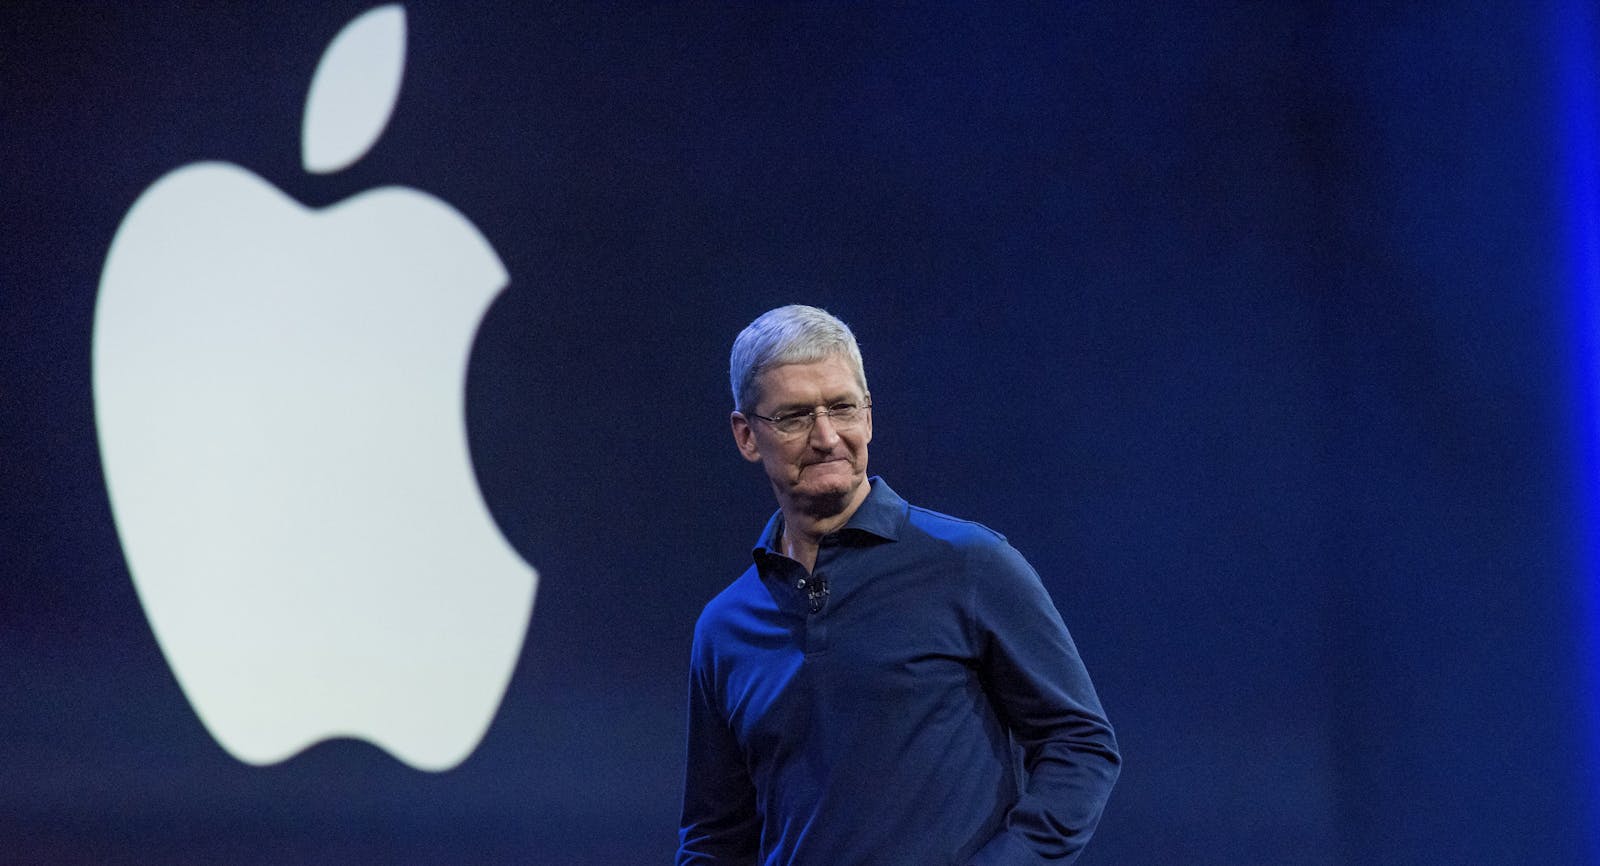 Apple CEO Tim Cook. Photo by Bloomberg.